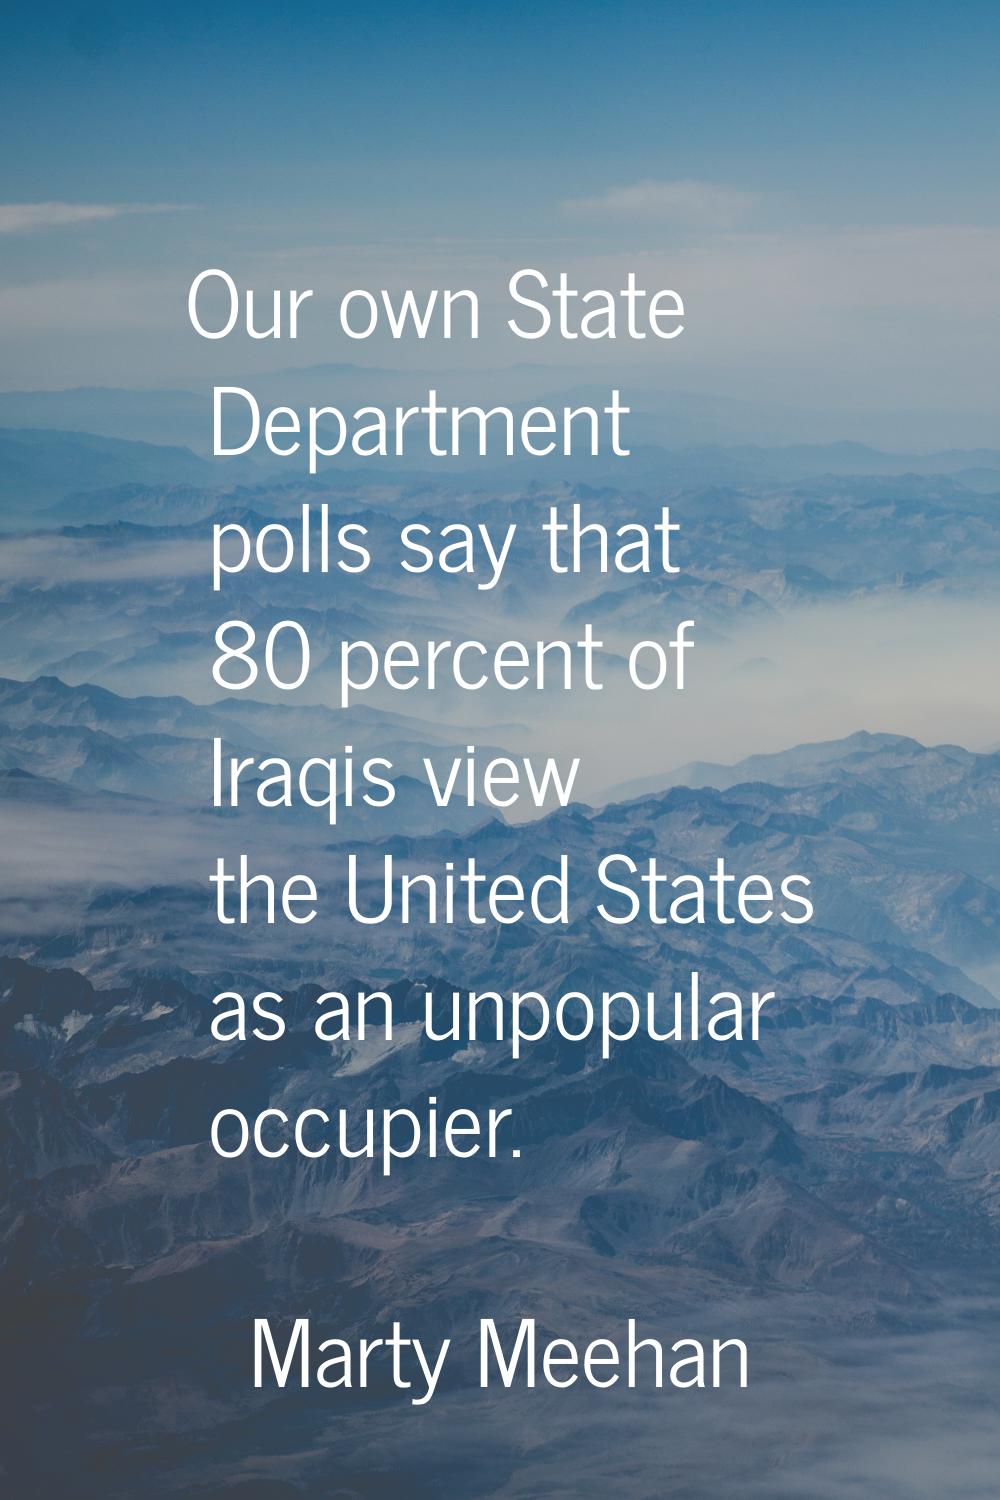 Our own State Department polls say that 80 percent of Iraqis view the United States as an unpopular